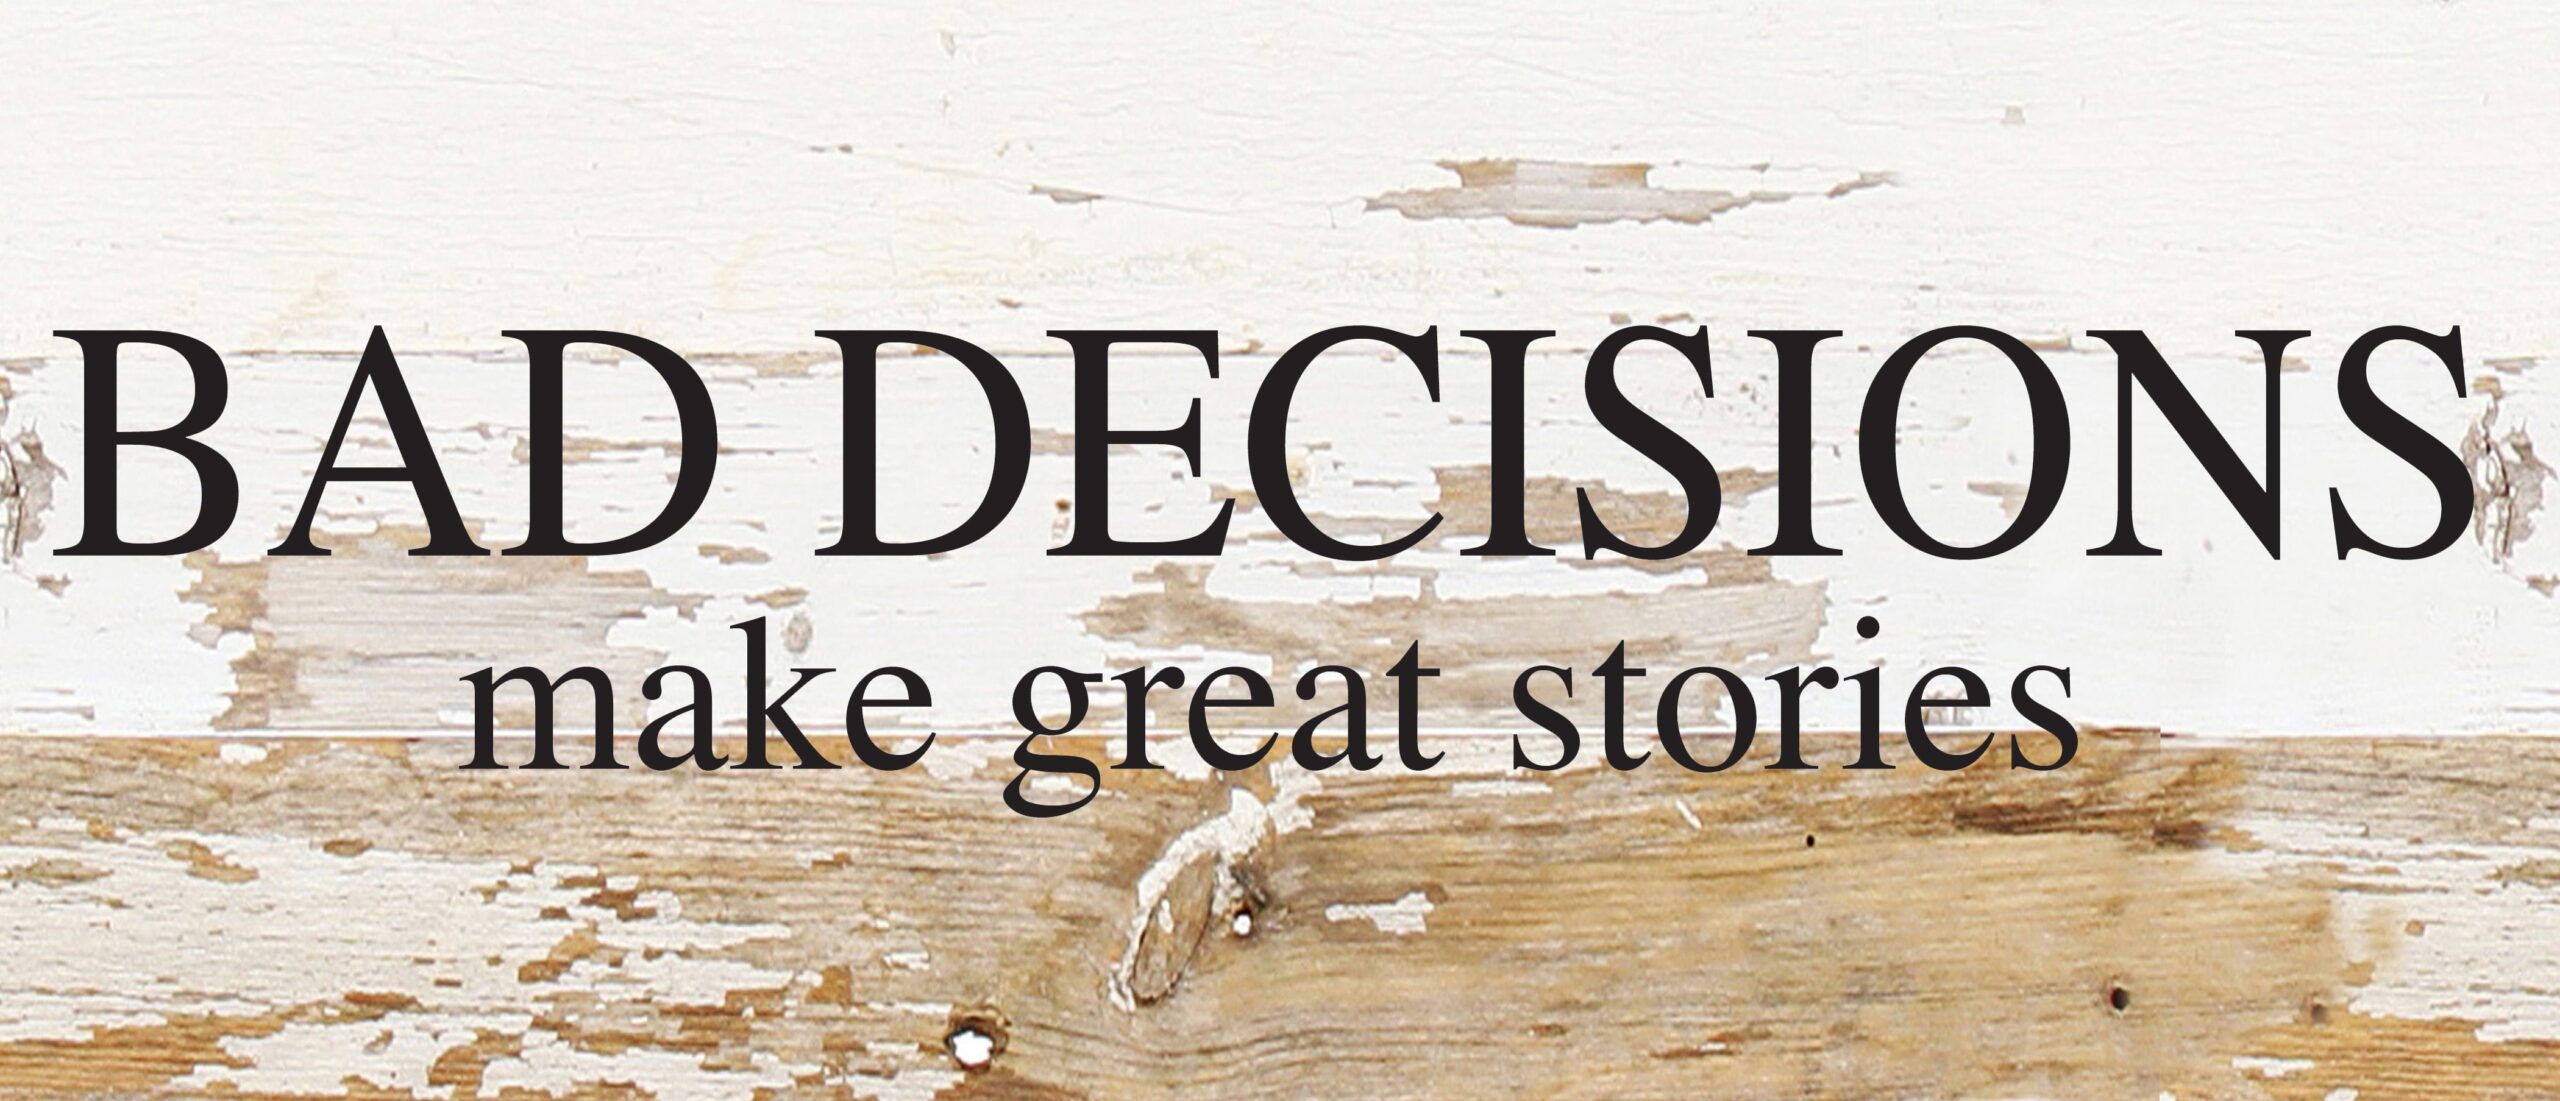 Bad decisions make great stories. / 14"x6" Reclaimed Wood Sign